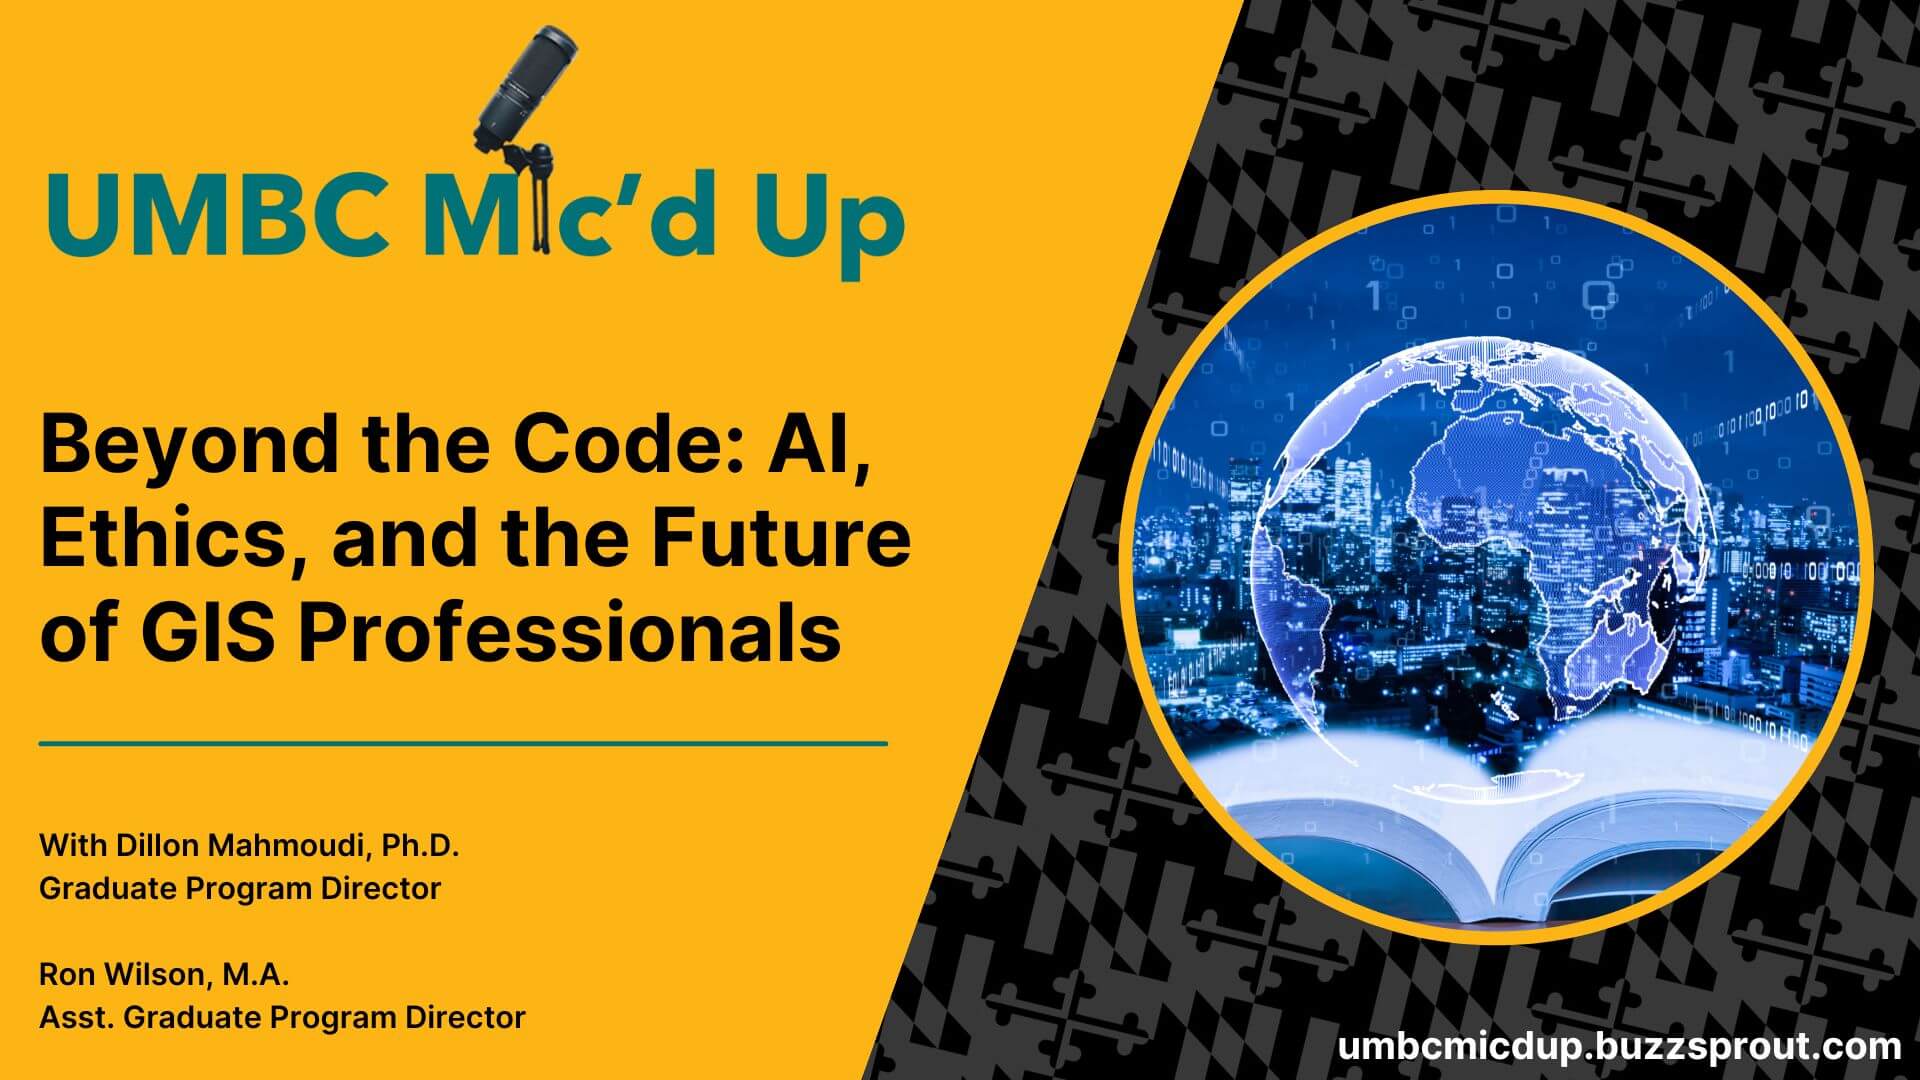 The Future of AI in GIS is addressed in this UMBC Mic'd Up Podcast episode.